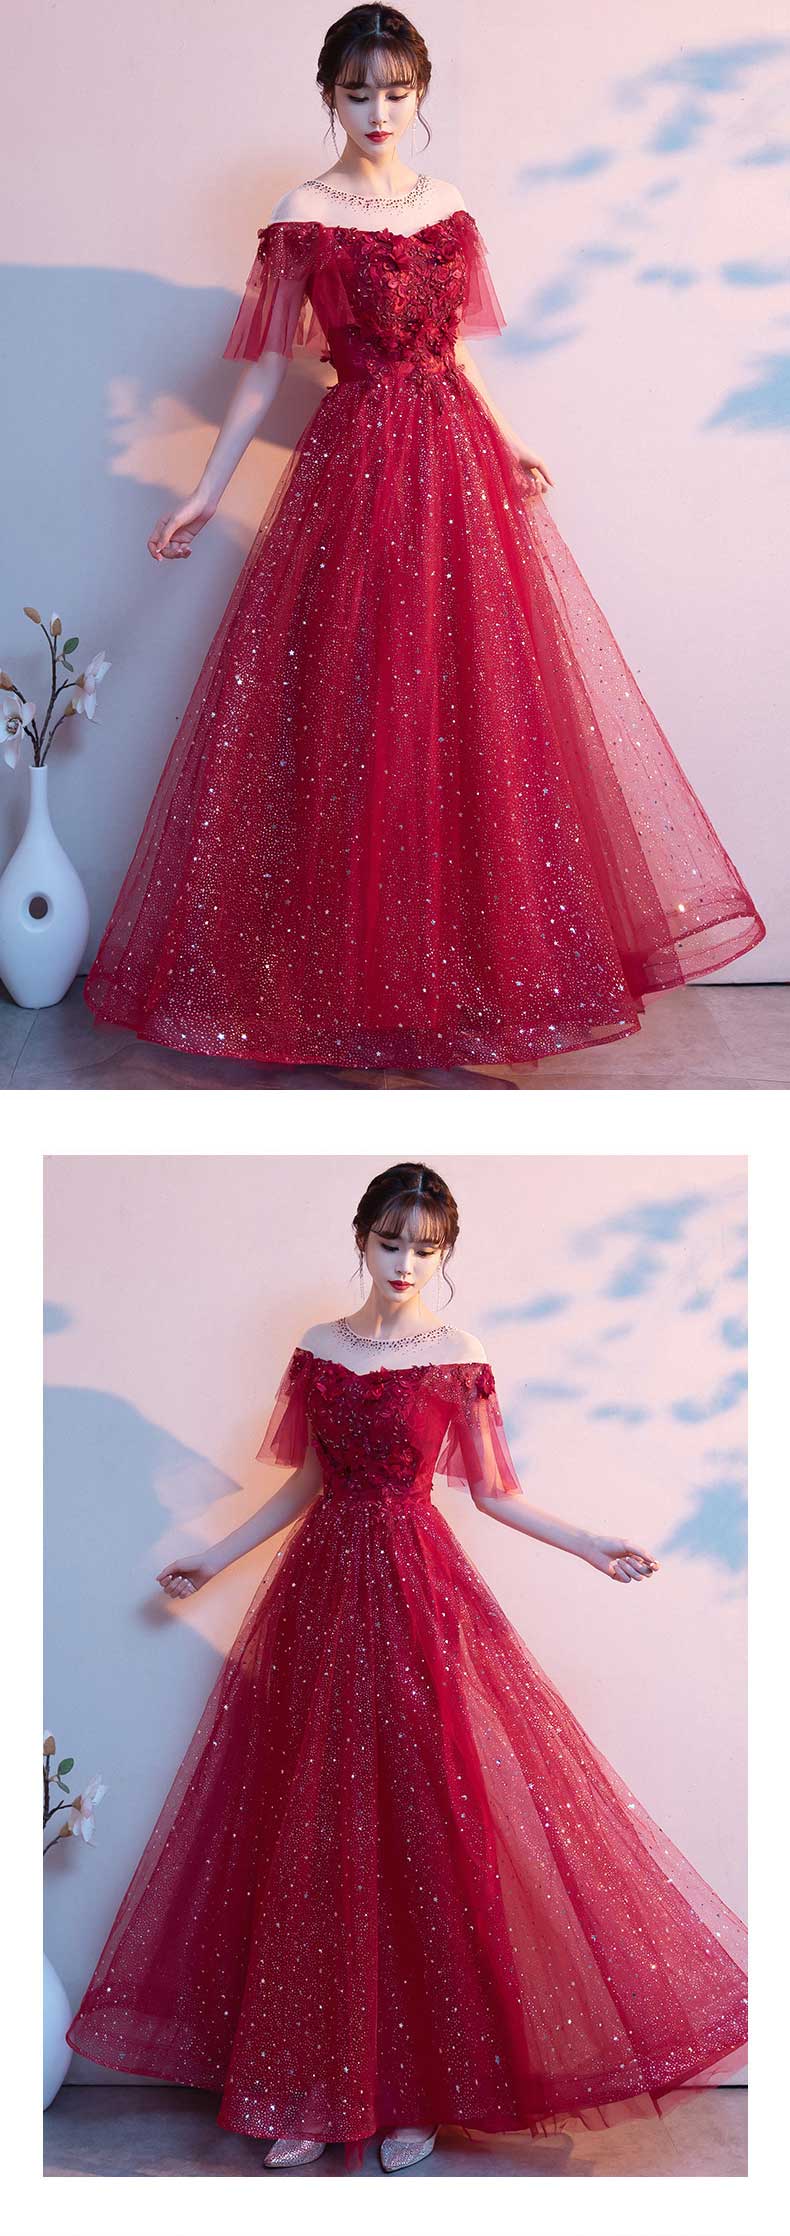 Sweet-Off-Shoulder-Chiffon-Wine-Red-Cocktail-Prom-Long-Dress12